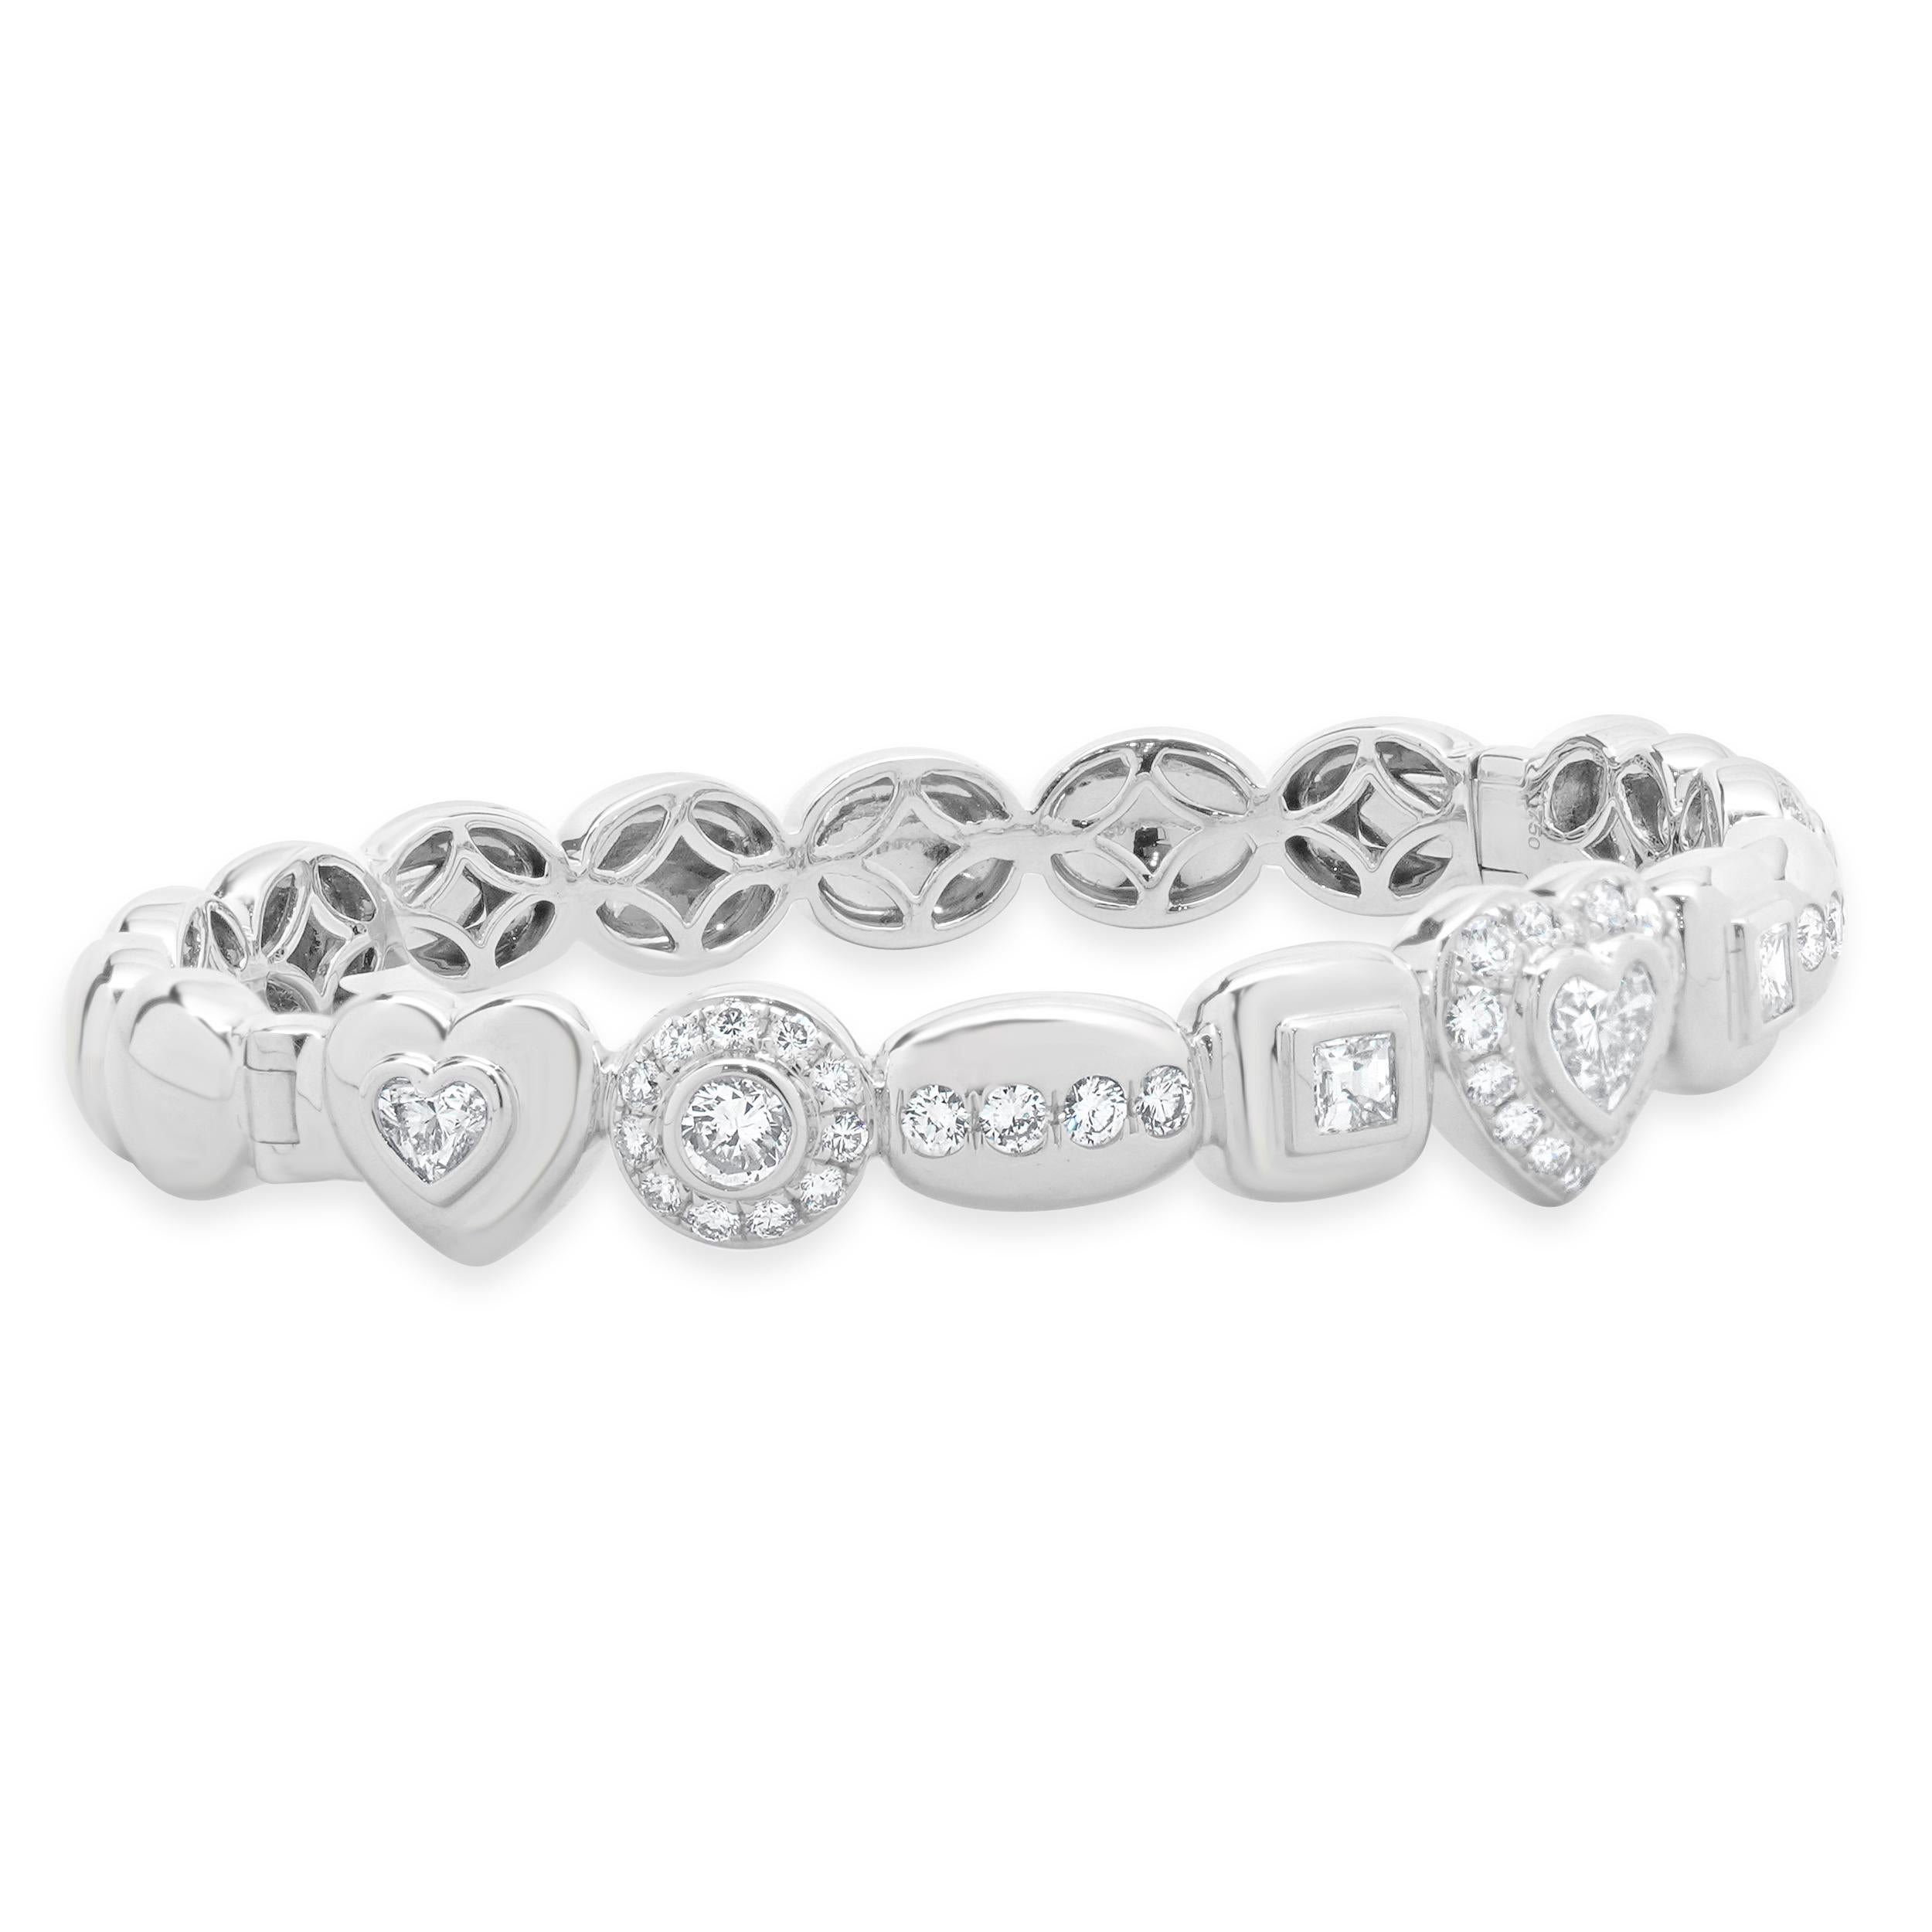 Designer: custom
Material: 18K white gold
Diamond: 46 round brilliant cut = 1.55cttw
Color: H
Clarity: VS2
Diamond: 5 fancy cut = 1.35cttw
Color: H
Clarity: VS2-SI1
Dimensions: bracelet will fit up to a 7-inch wrist
Weight: 25.39 grams